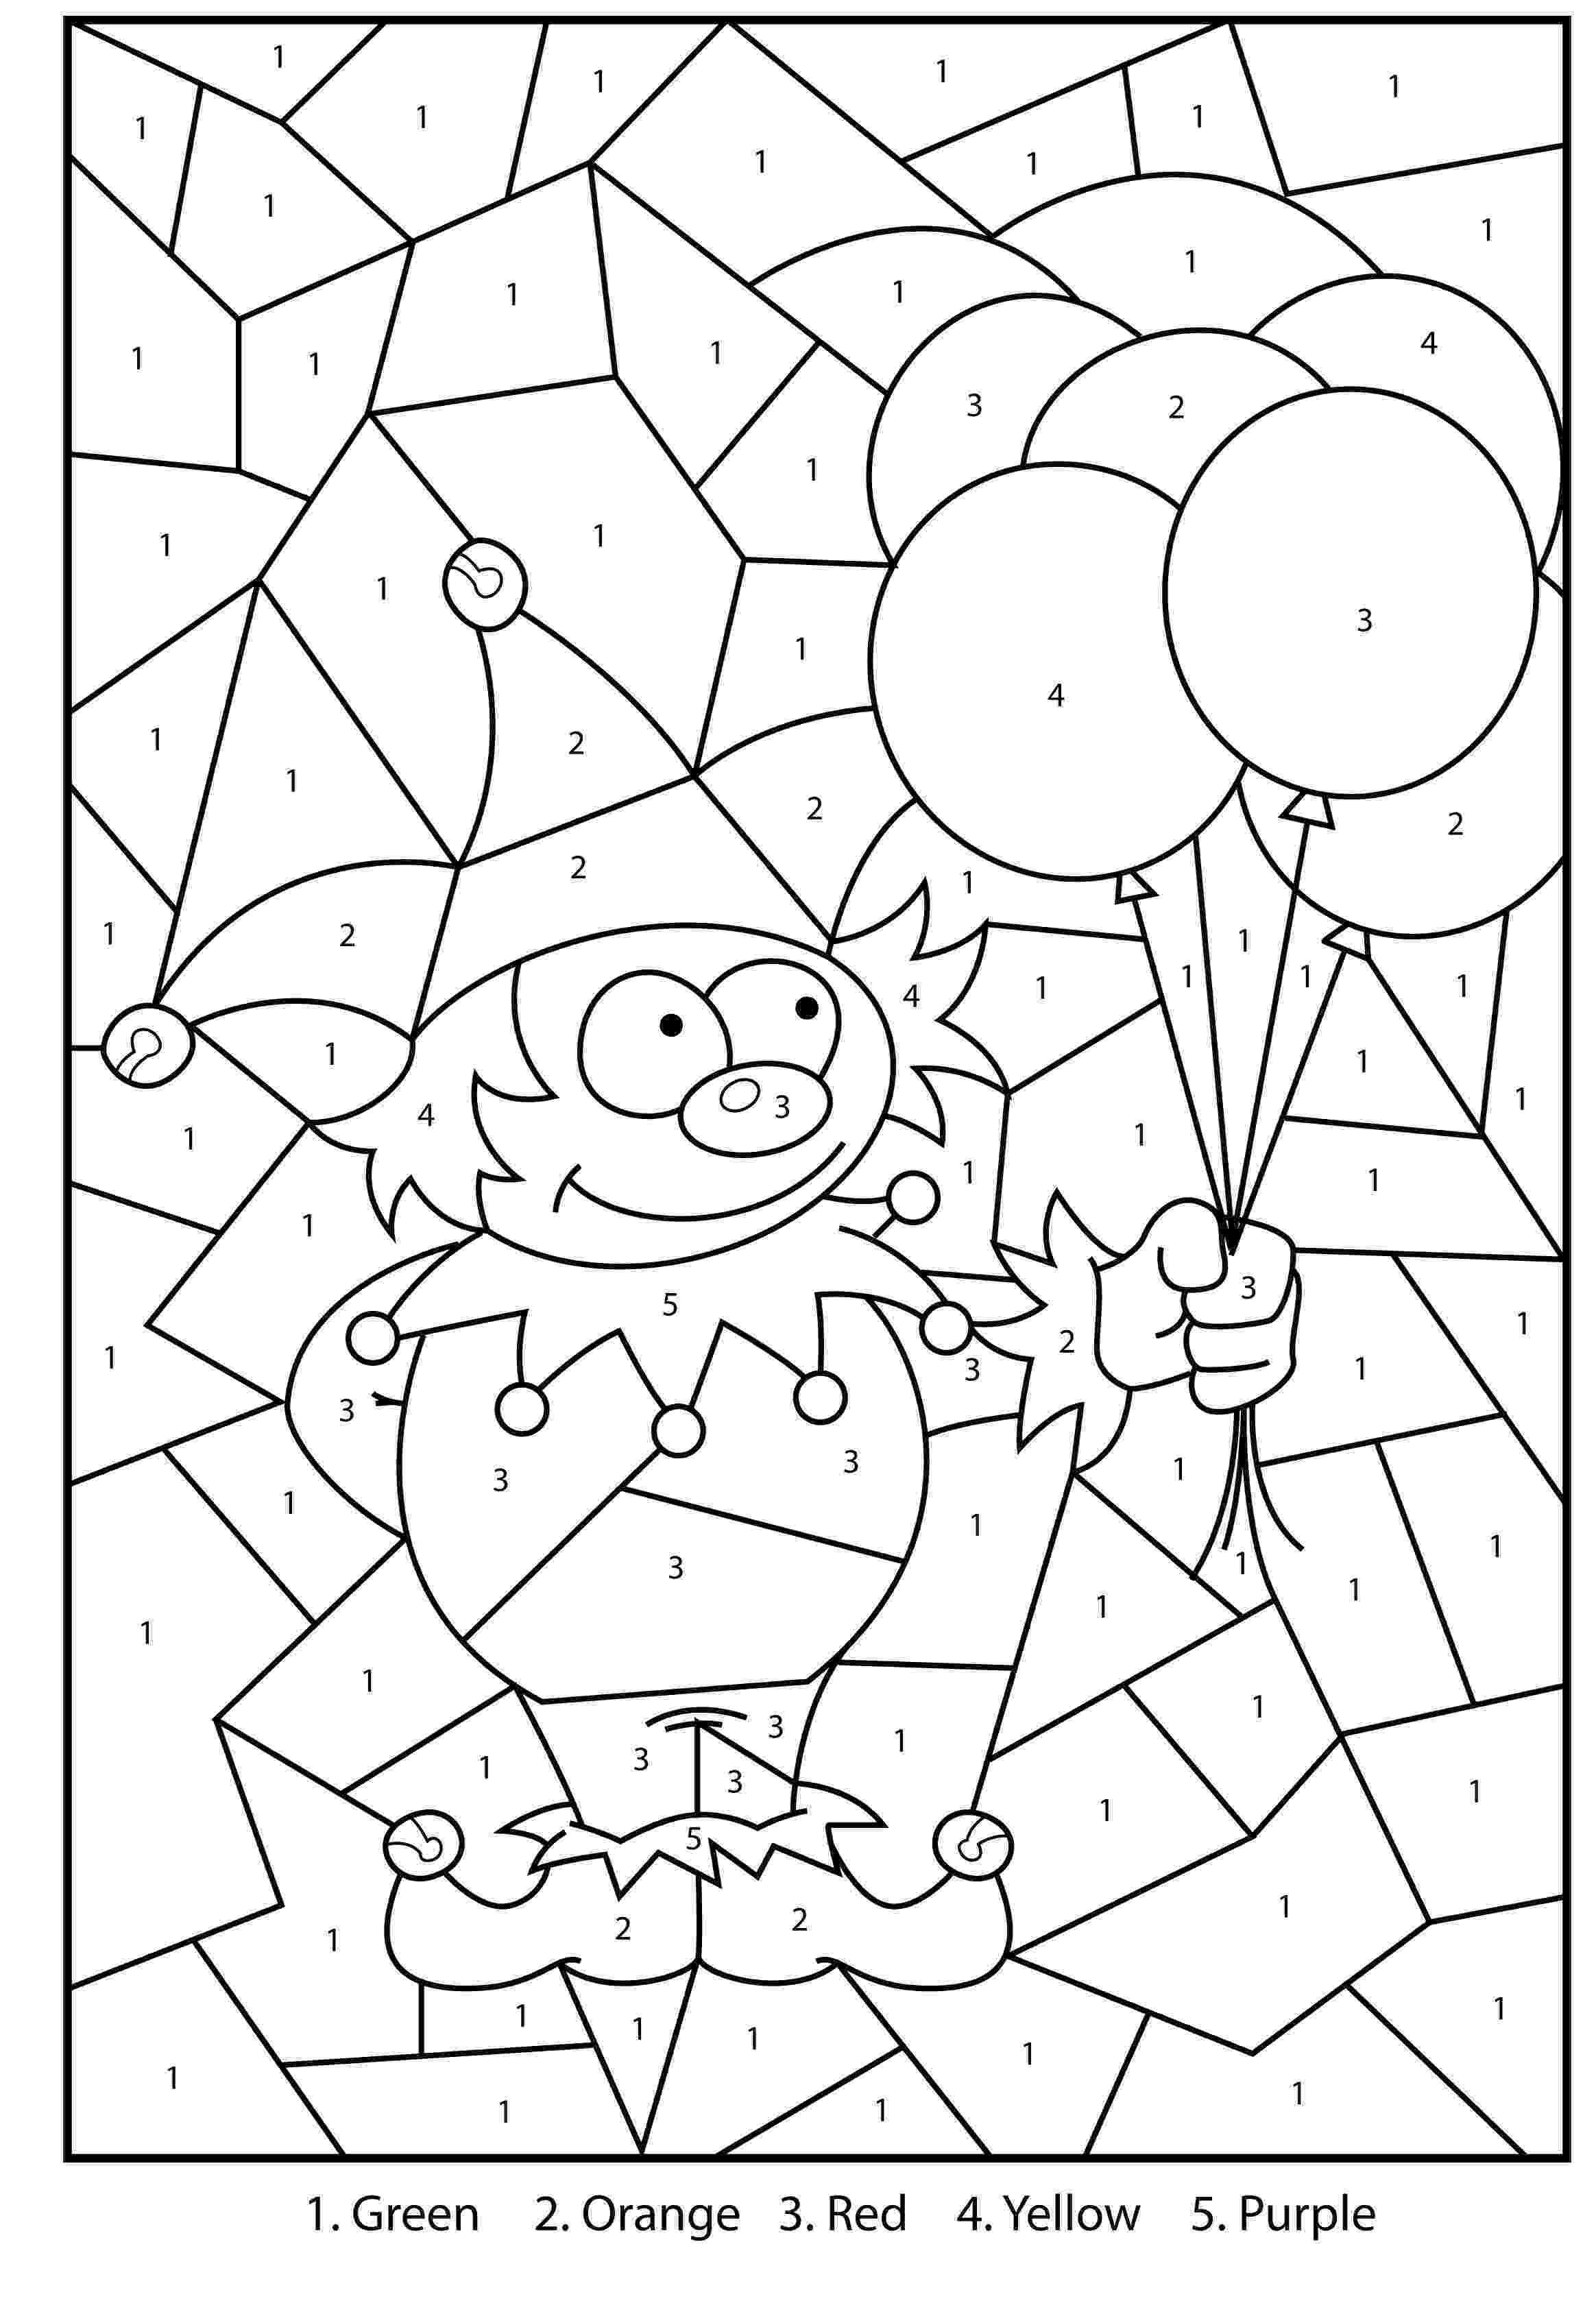 coloring picture numbers number coloring pages 1 20 coloring picture numbers 